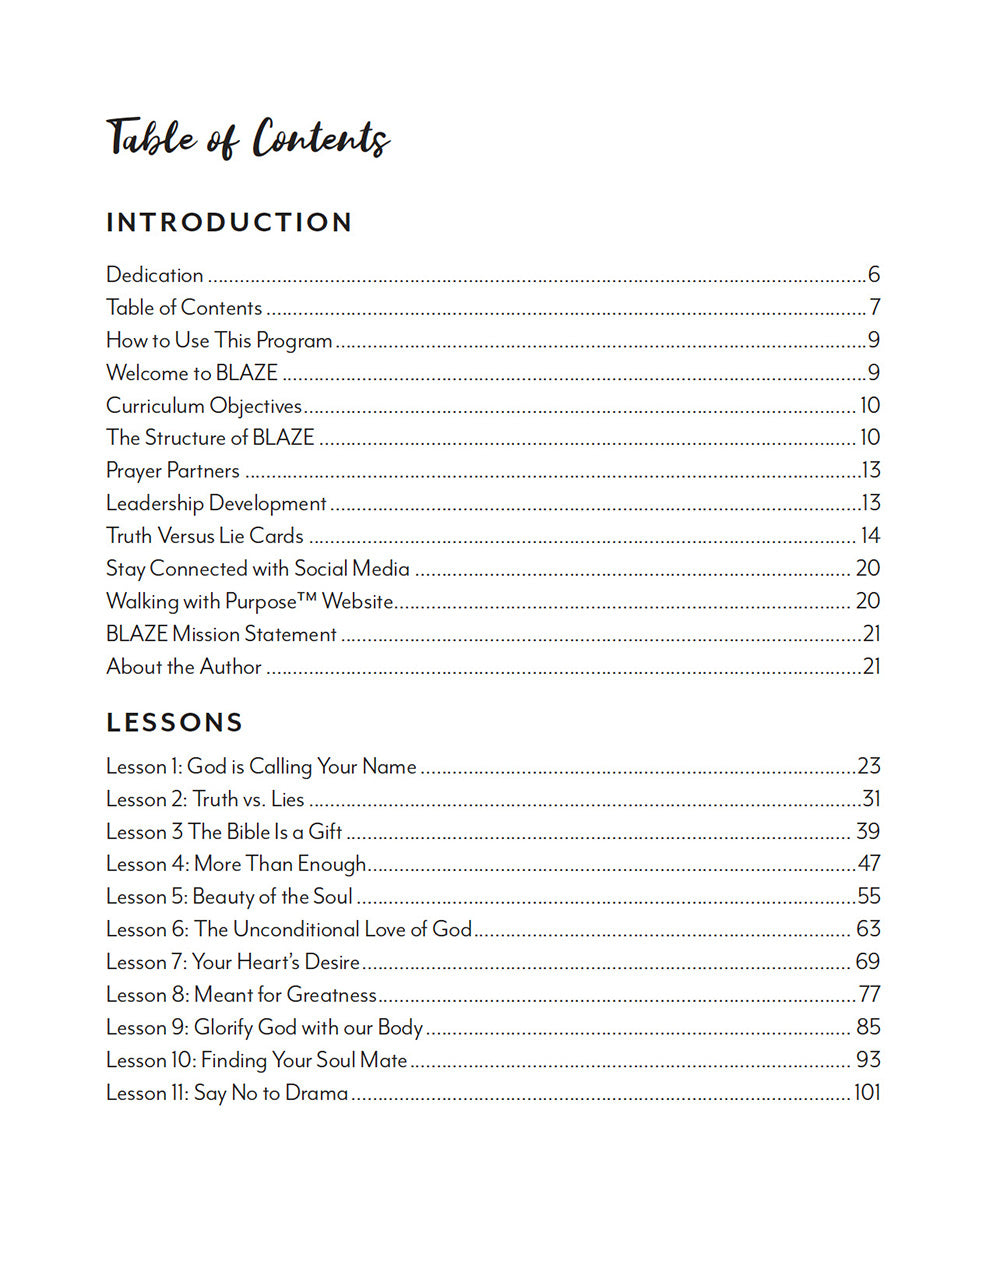 BLAZE Belong Leader's Guide table of contents page 1